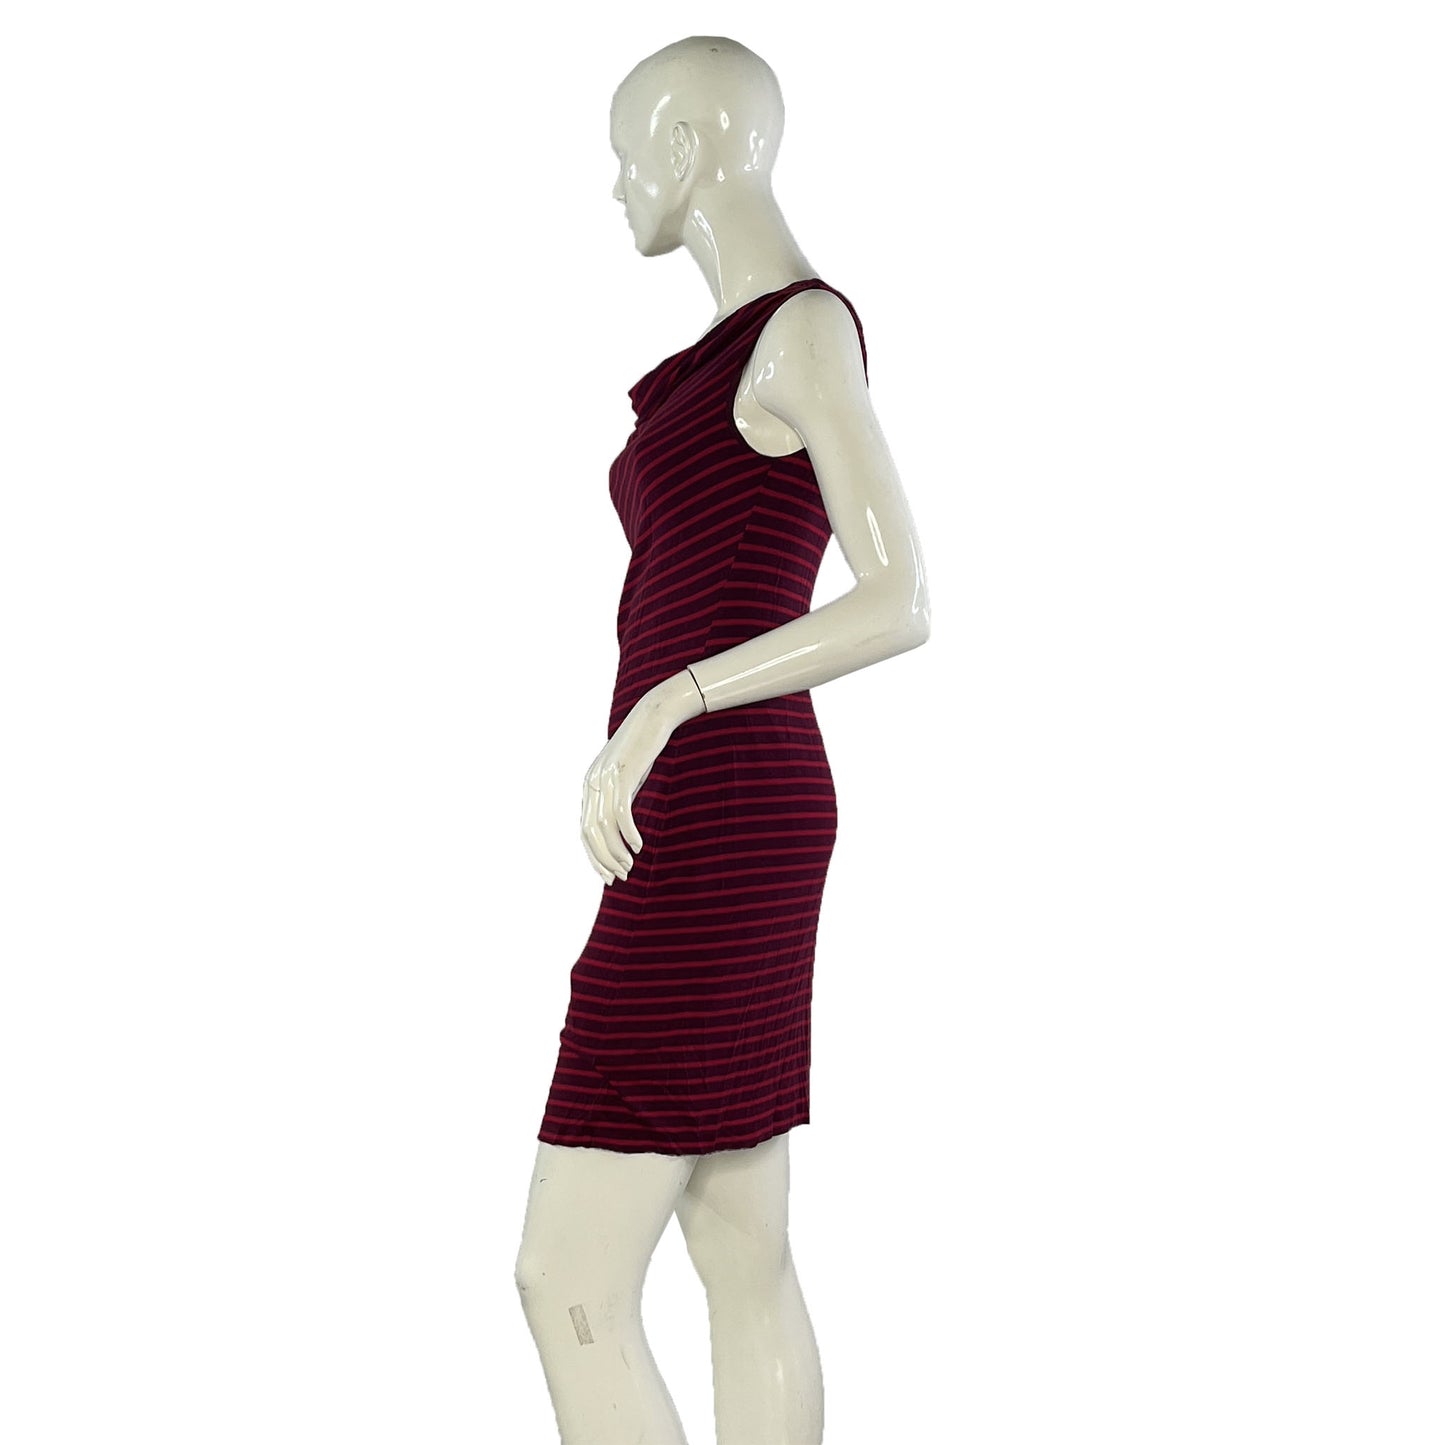 Ann Taylor Dress Above-Knee Sleeveless Cowl-Neck Striped Red, Dark Red Size SP SKU 000067-2